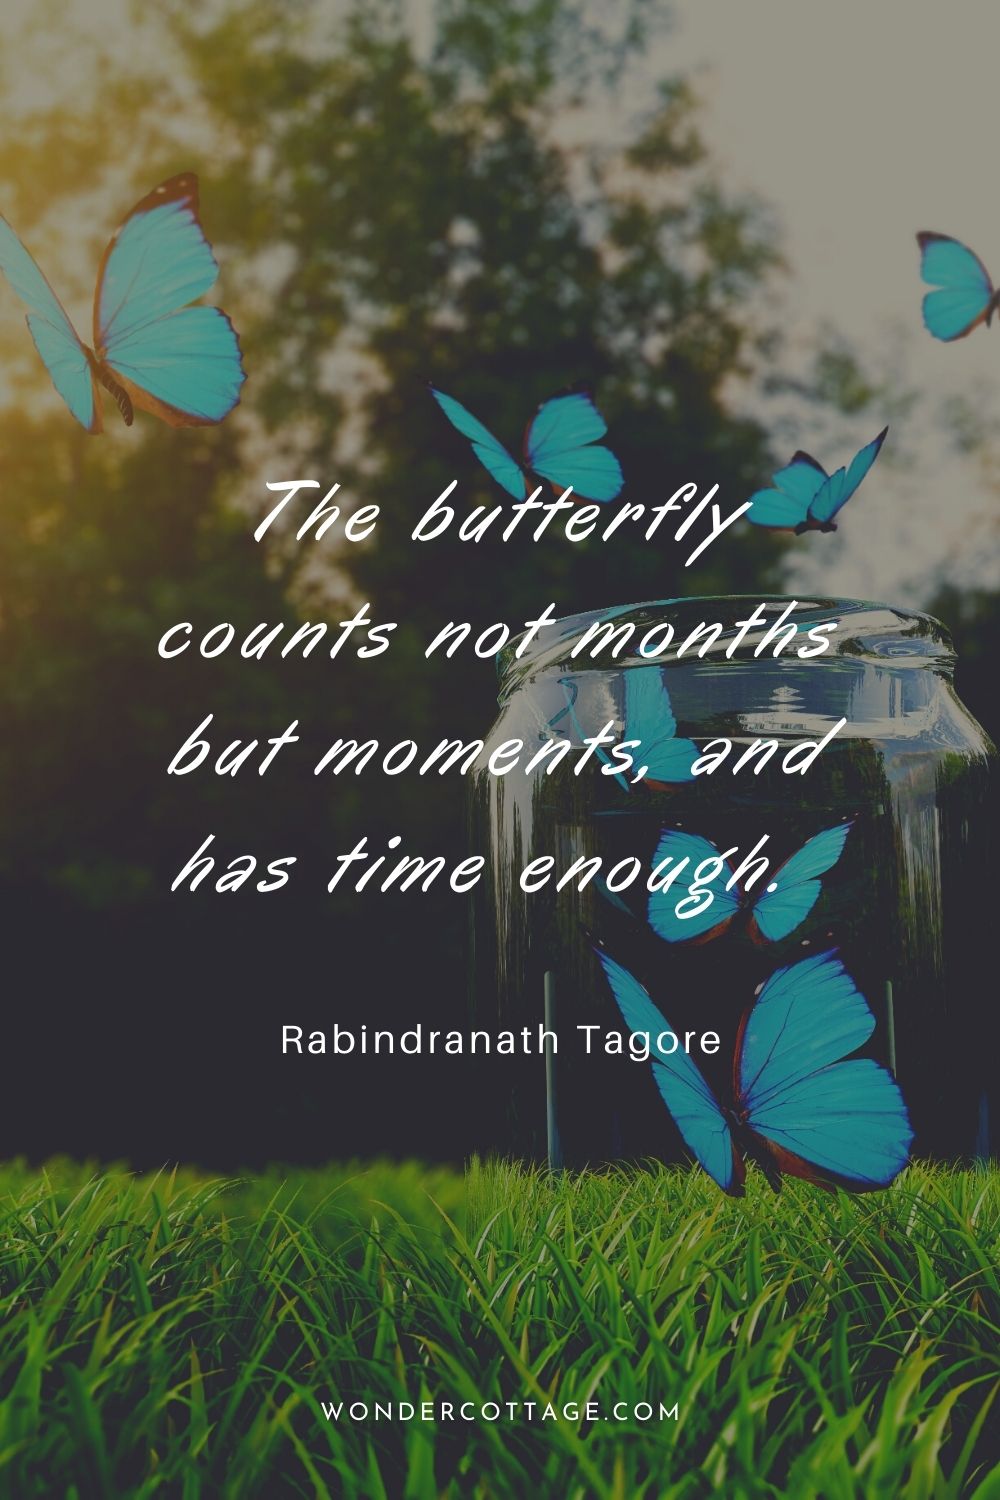 The butterfly counts not months but moments, and has time enough.  Rabindranath Tagore